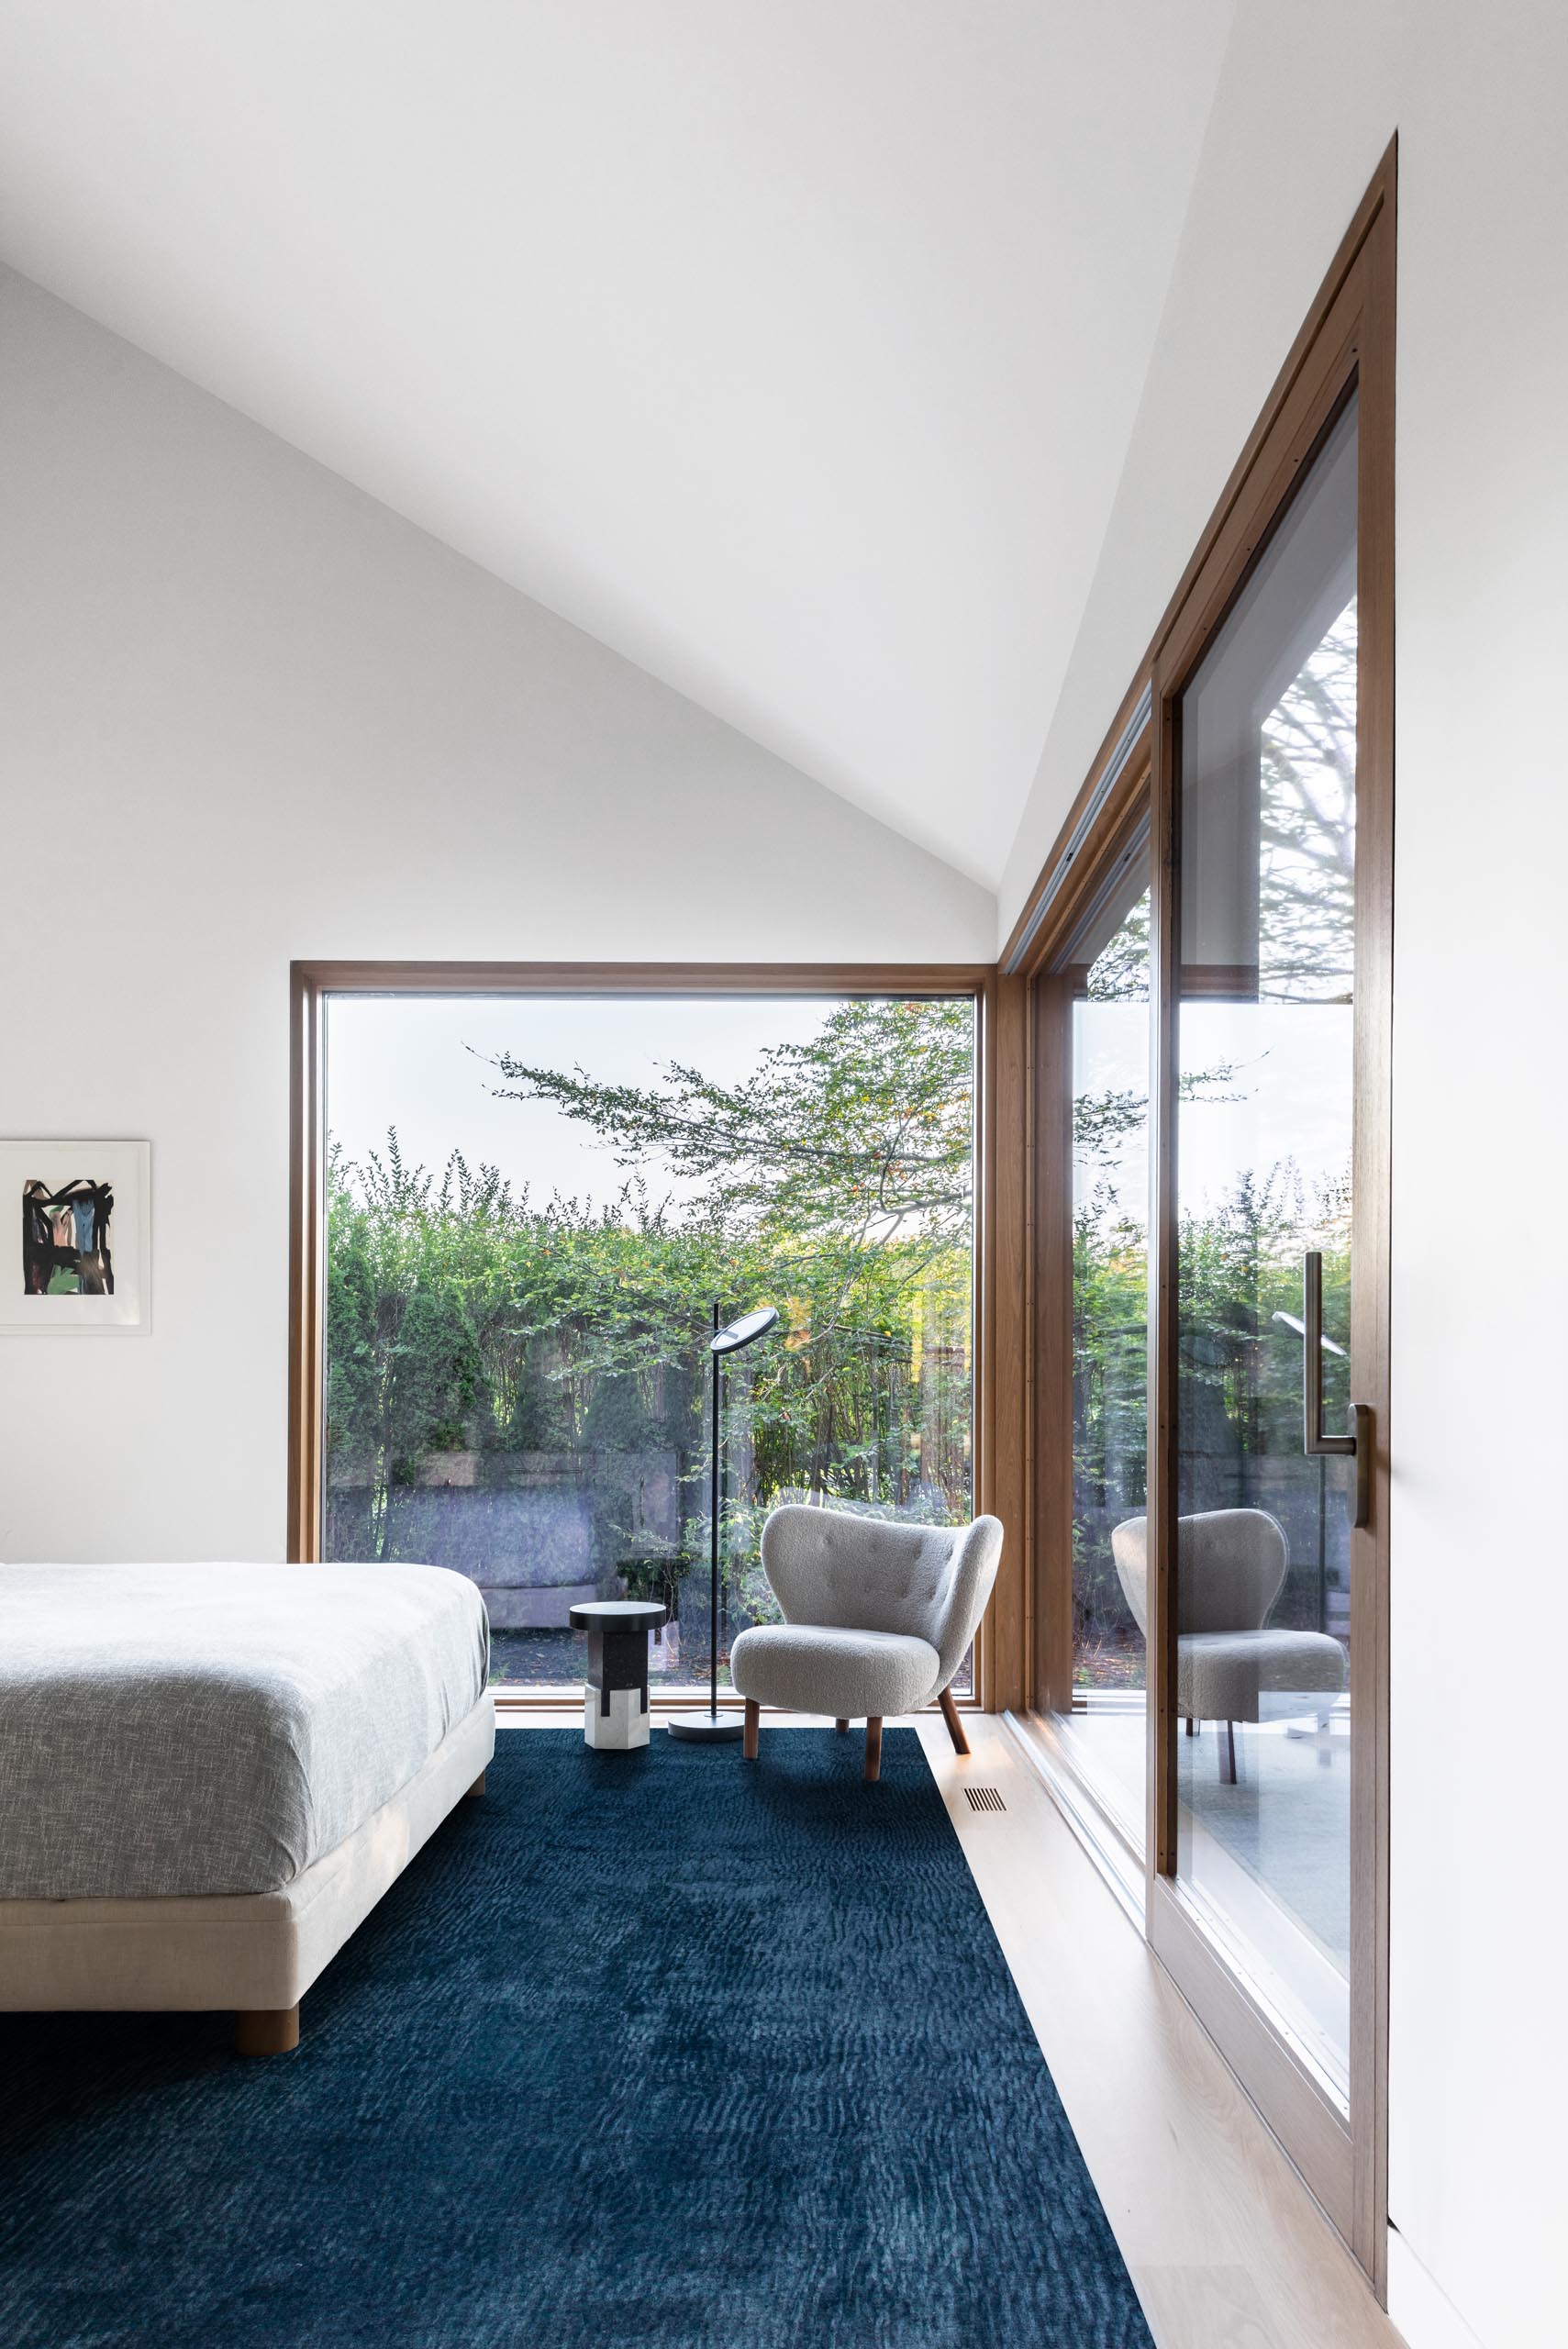 In this modern bedroom, large windows with wood frames provide views of the garden.